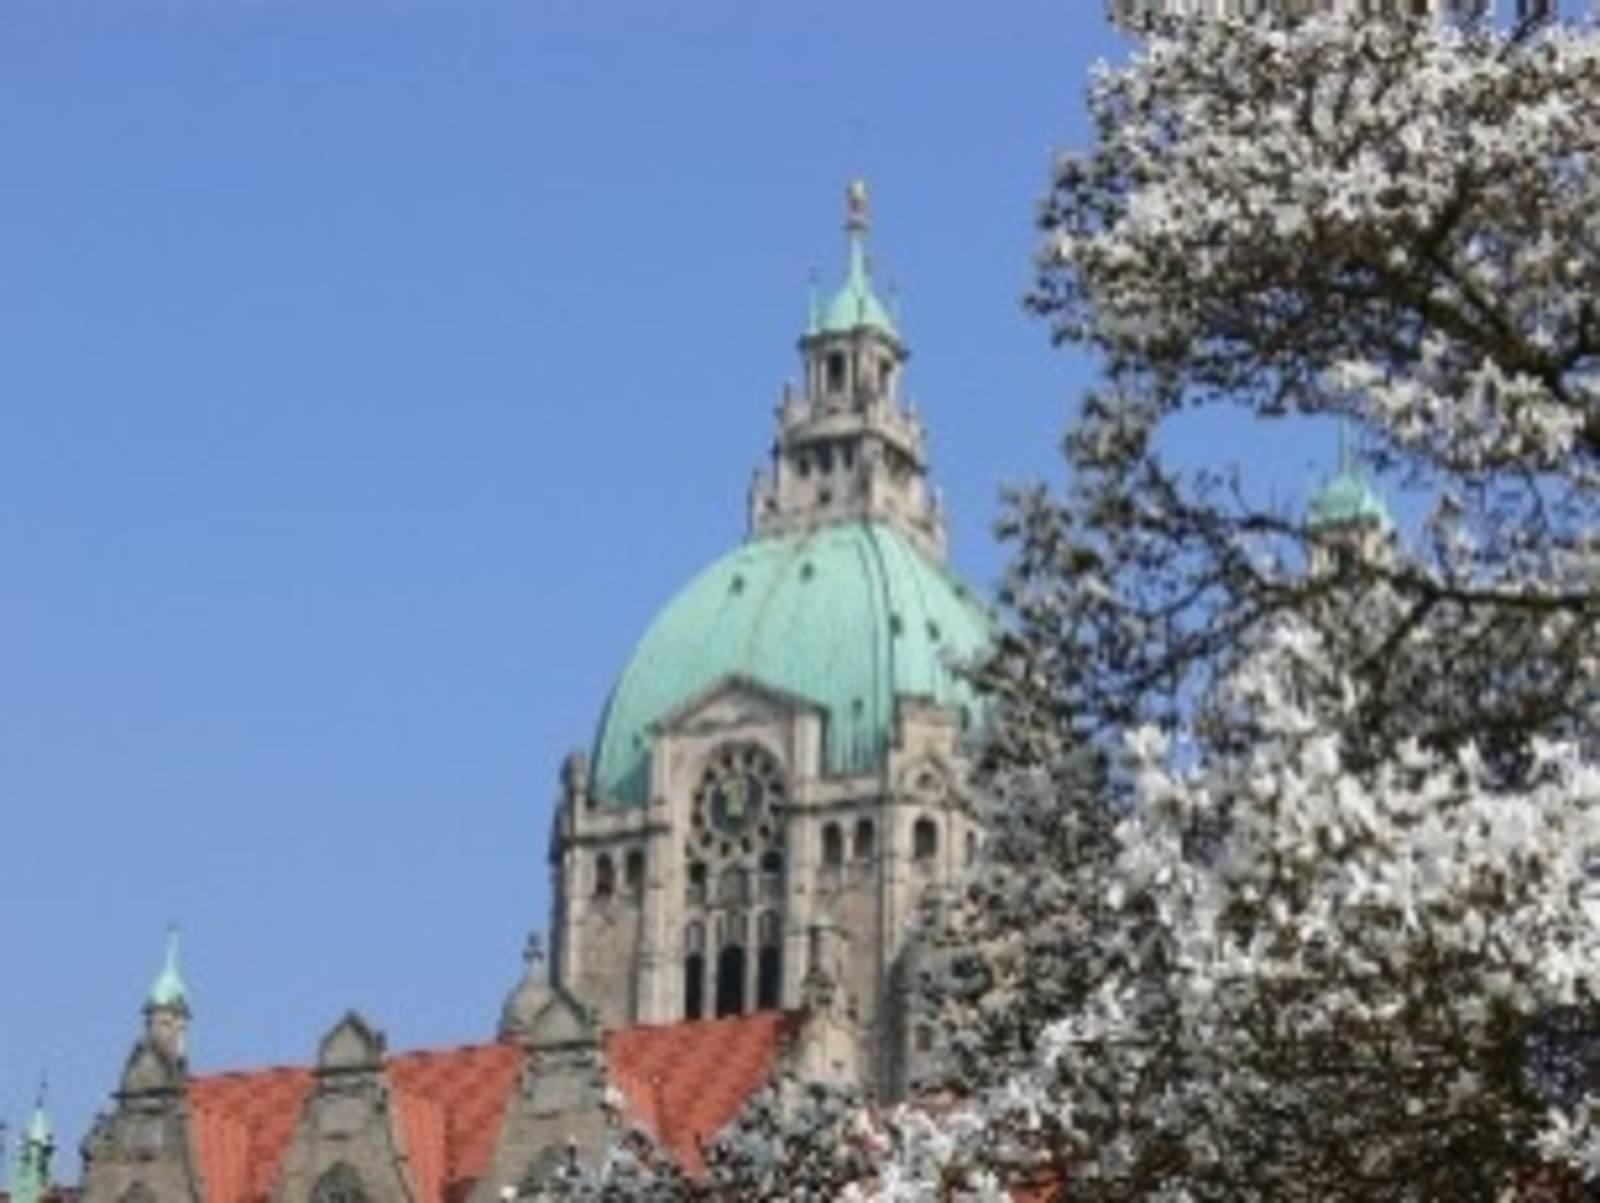 New Town Hall Hannover